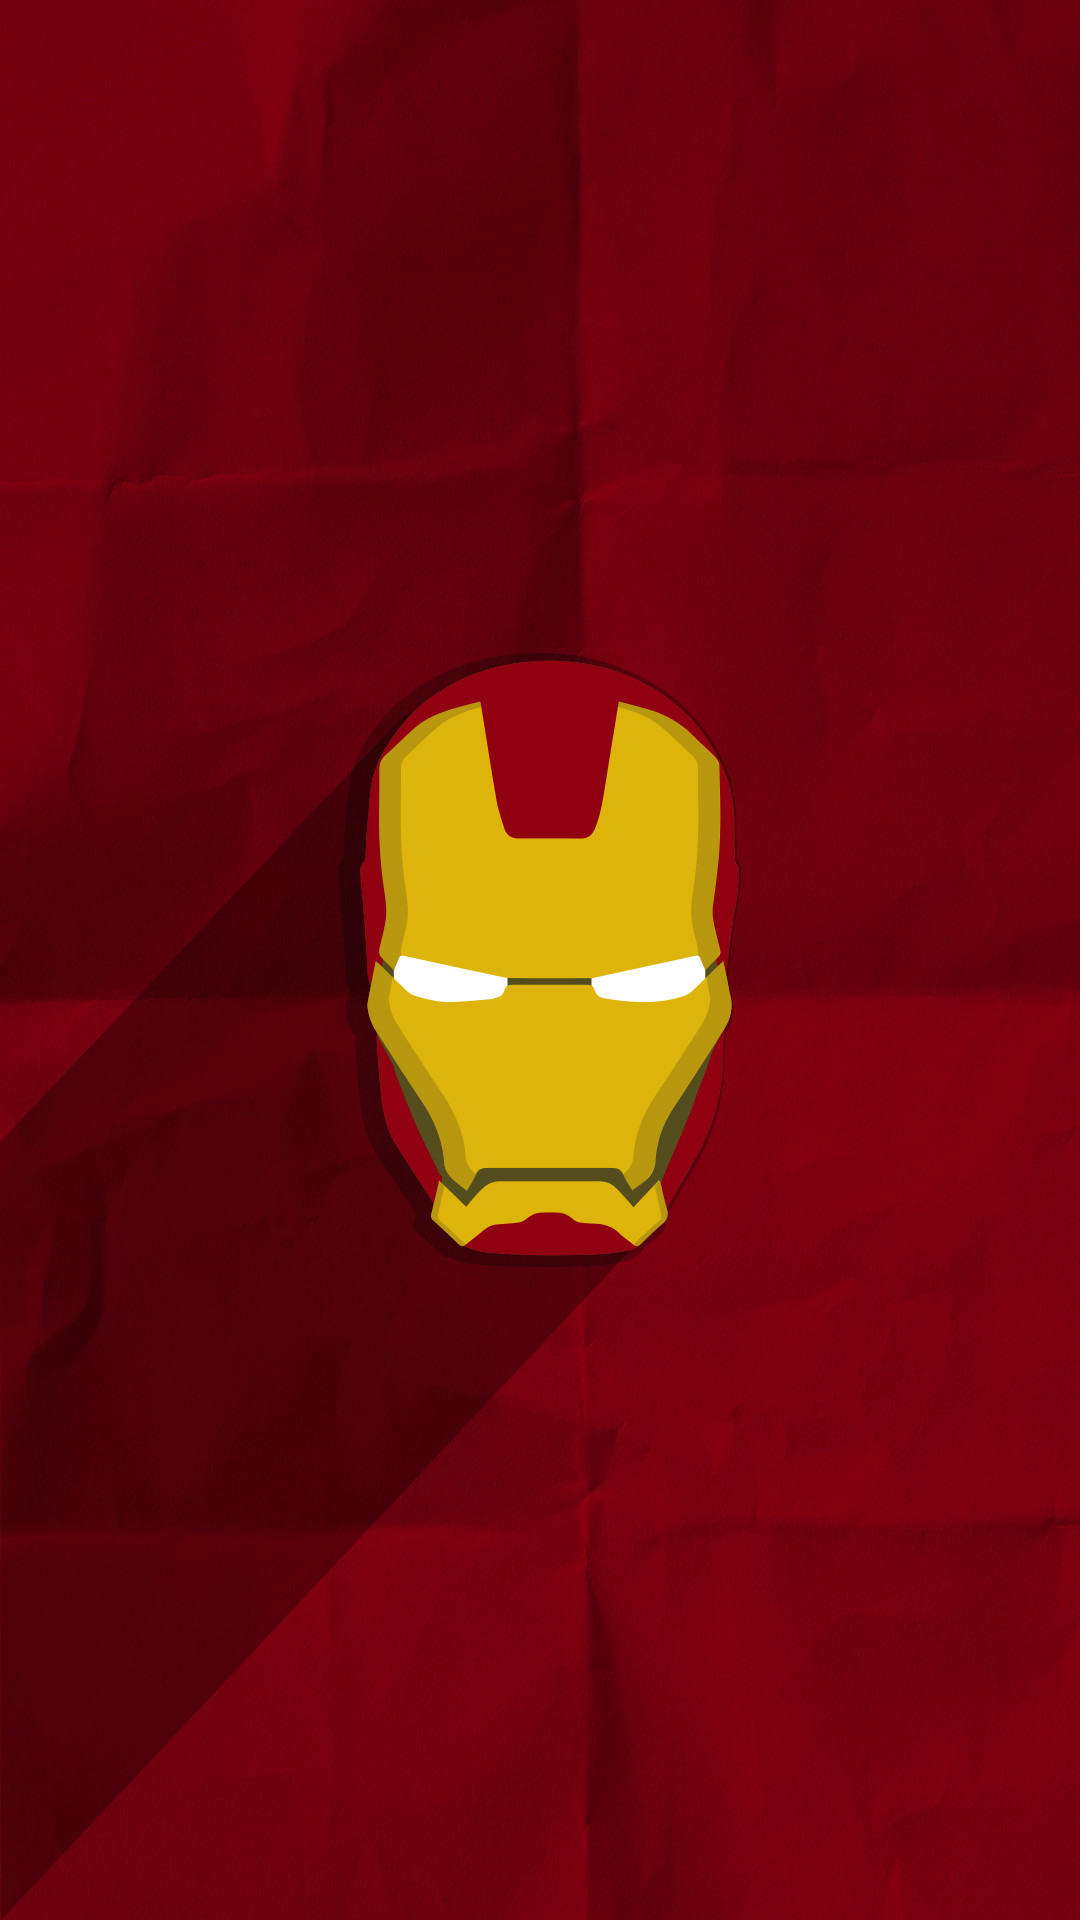 1080x1920 The wallpaper that Tony Stark would use.